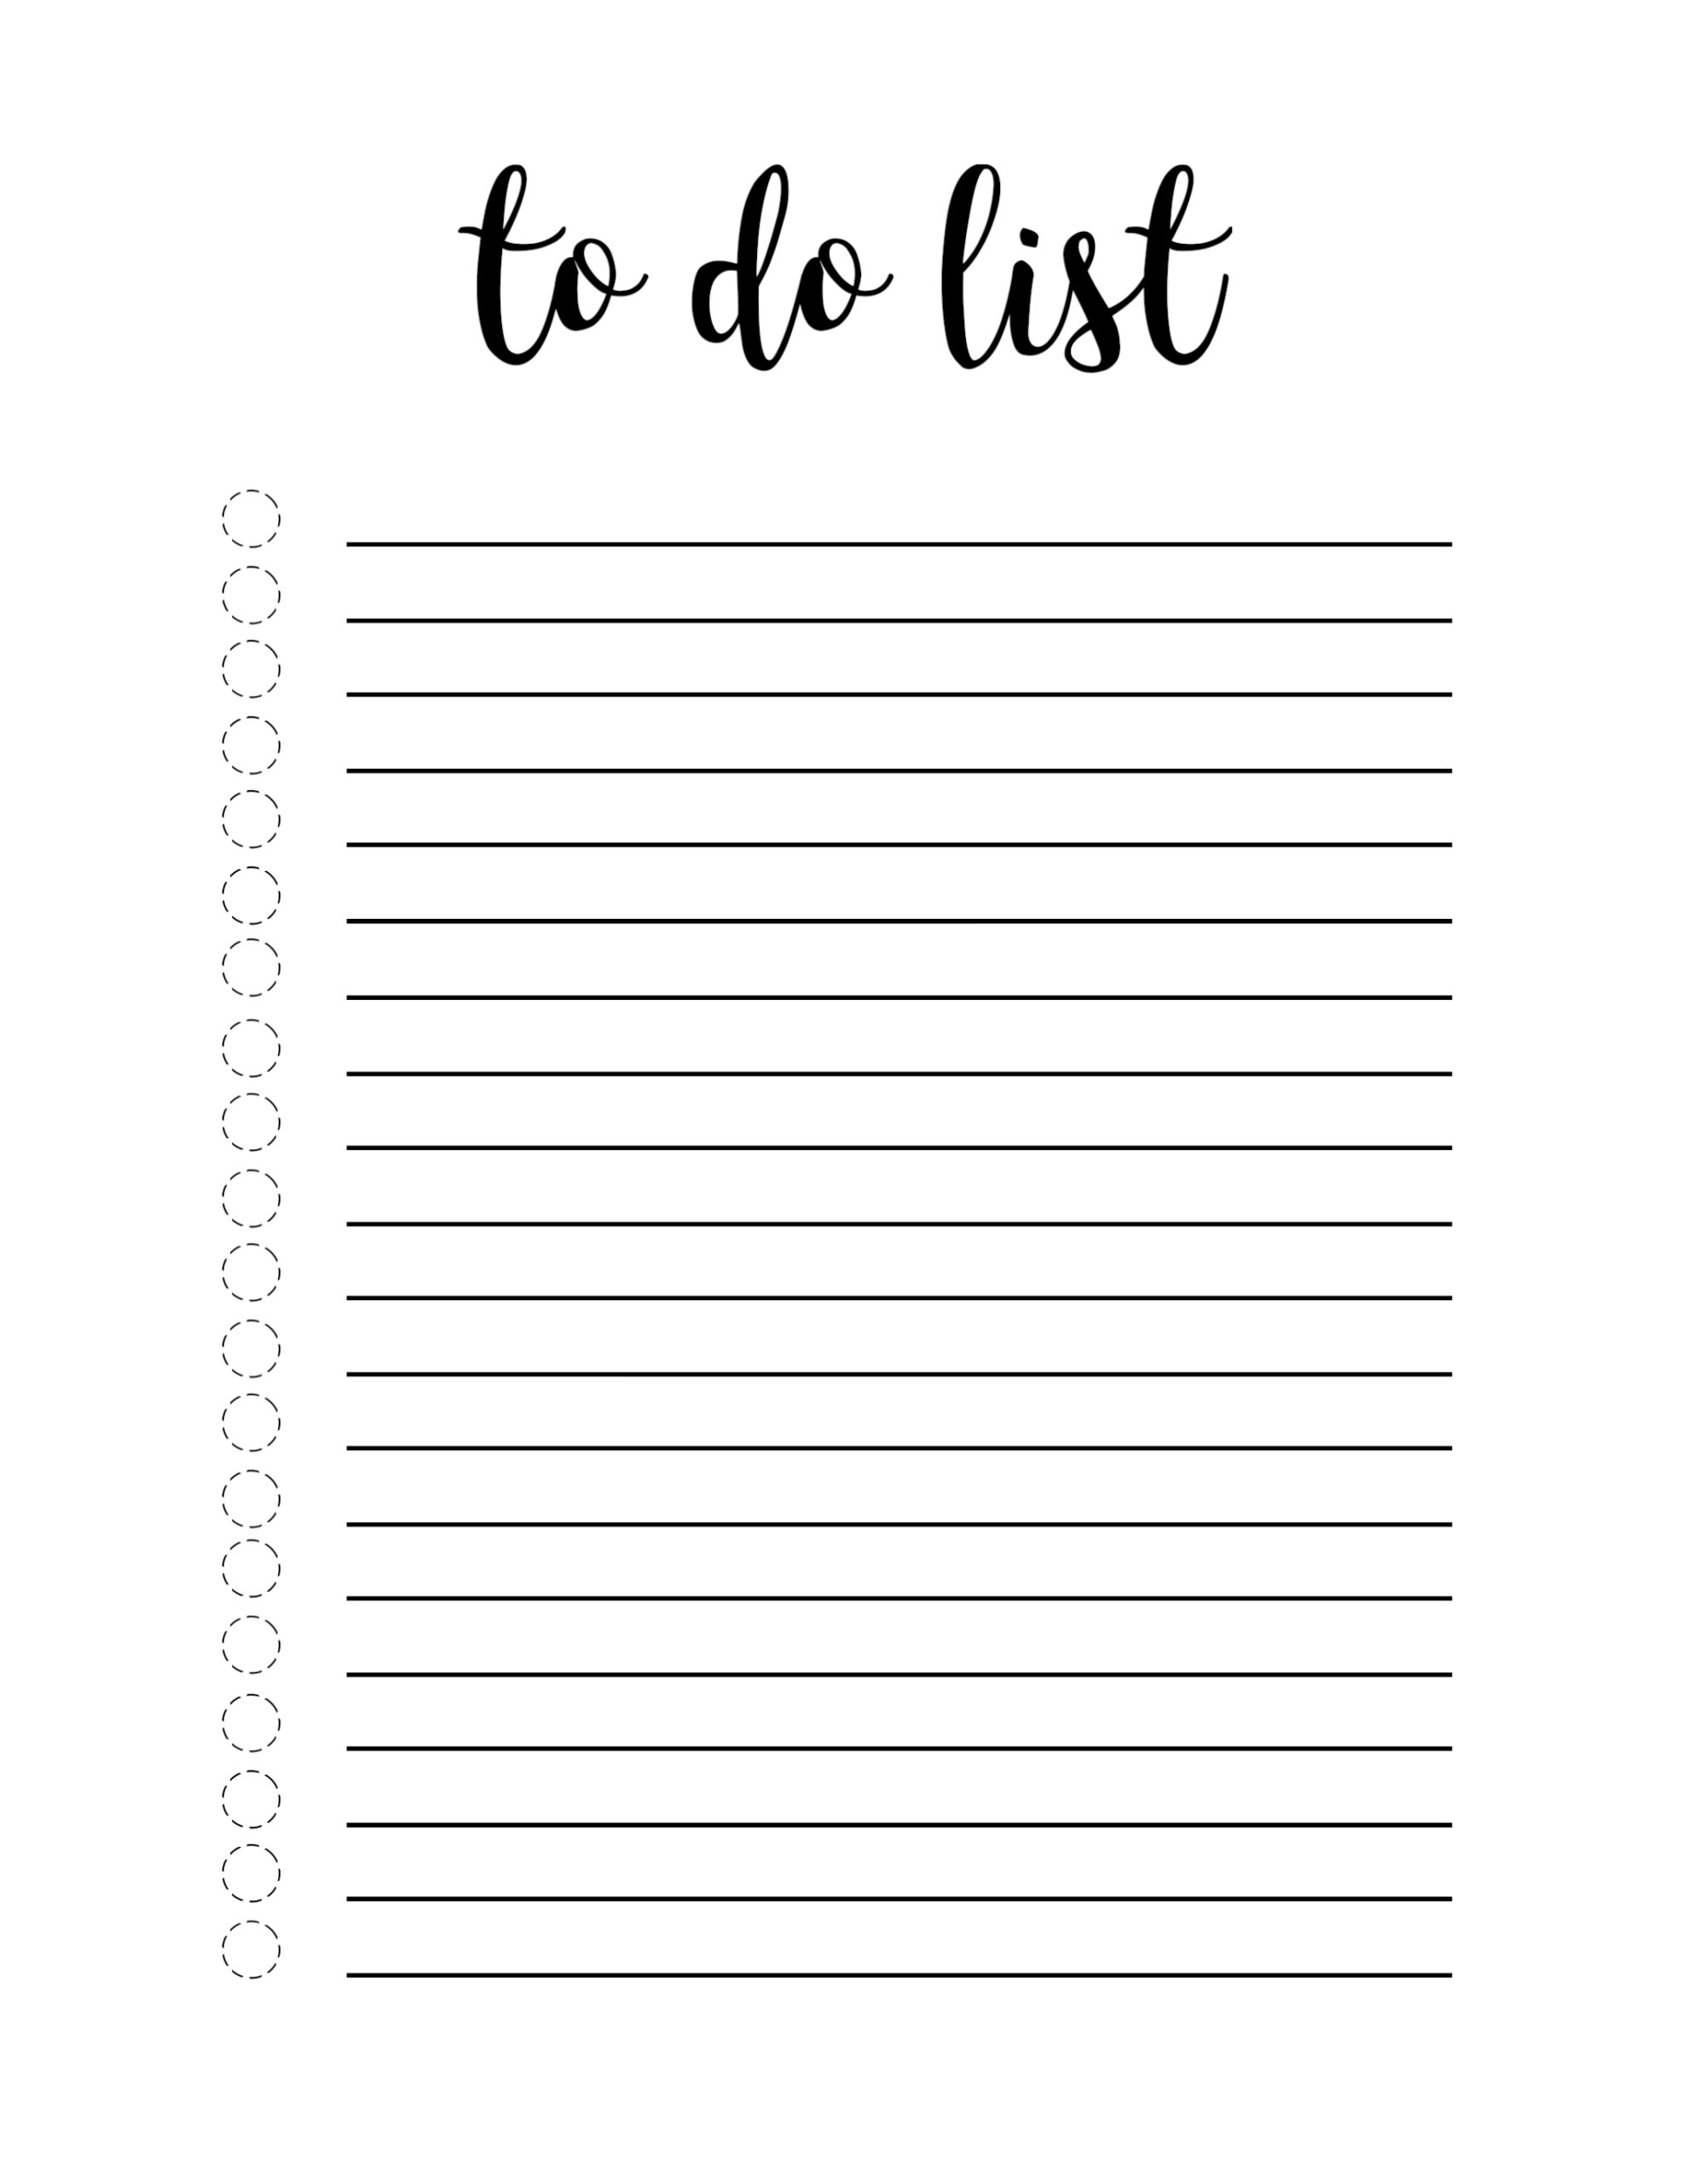 Free Printable To Do List Template - Paper Trail Design Regarding Blank To Do List Template